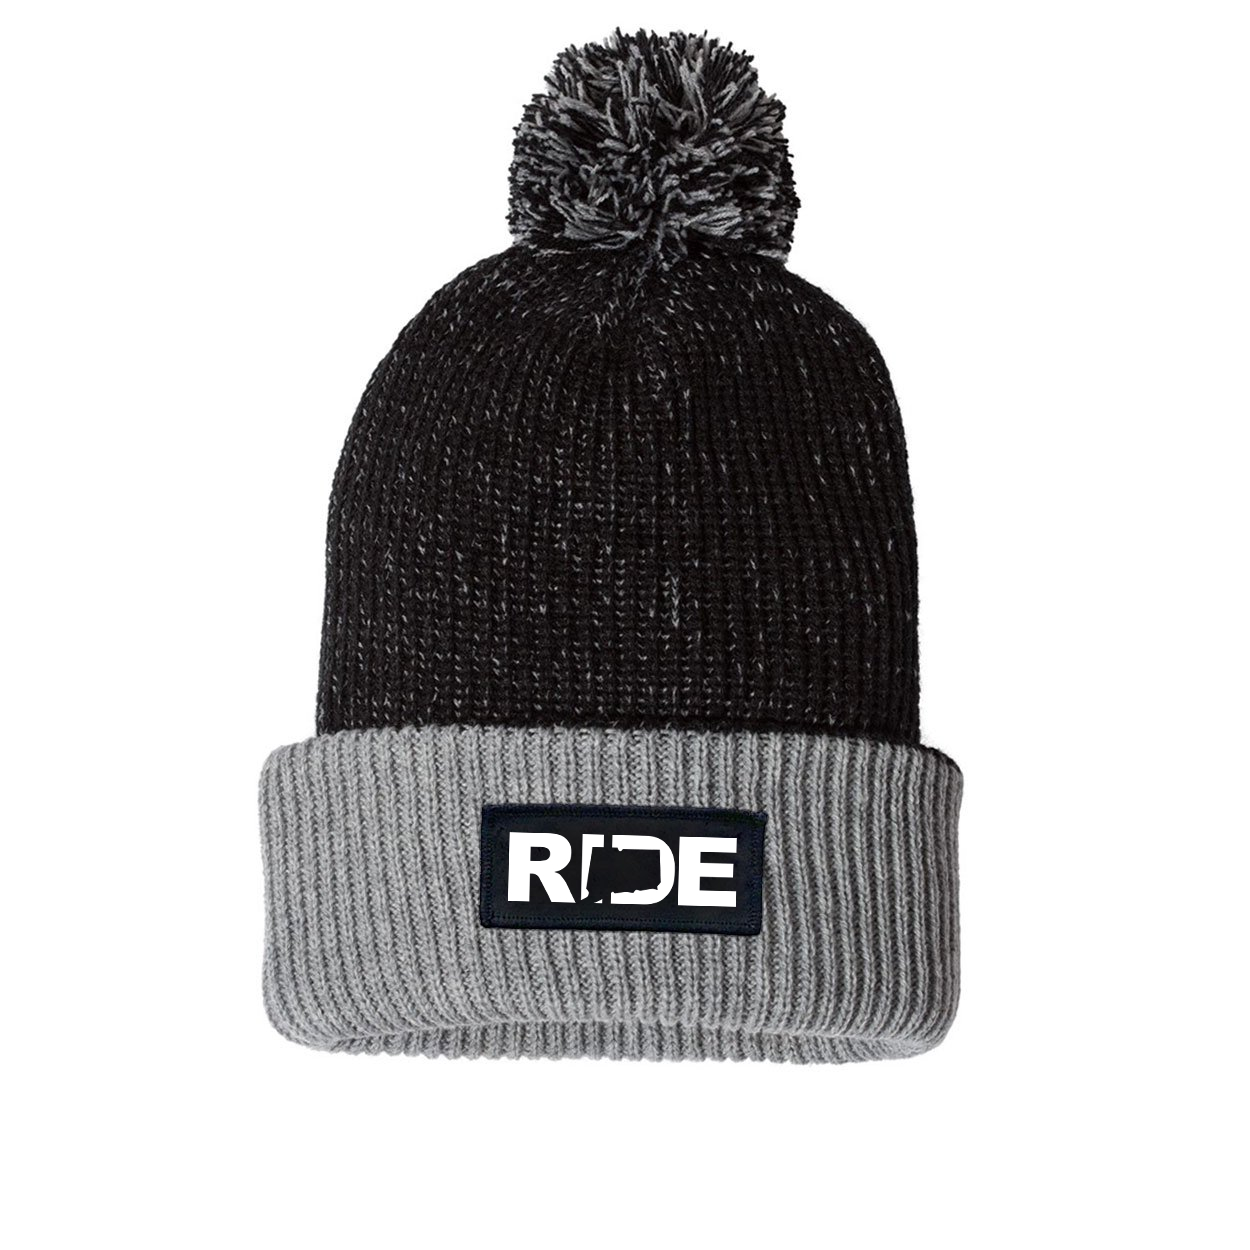 Ride Connecticut Night Out Woven Patch Roll Up Pom Knit Beanie Black/Gray (White Logo)